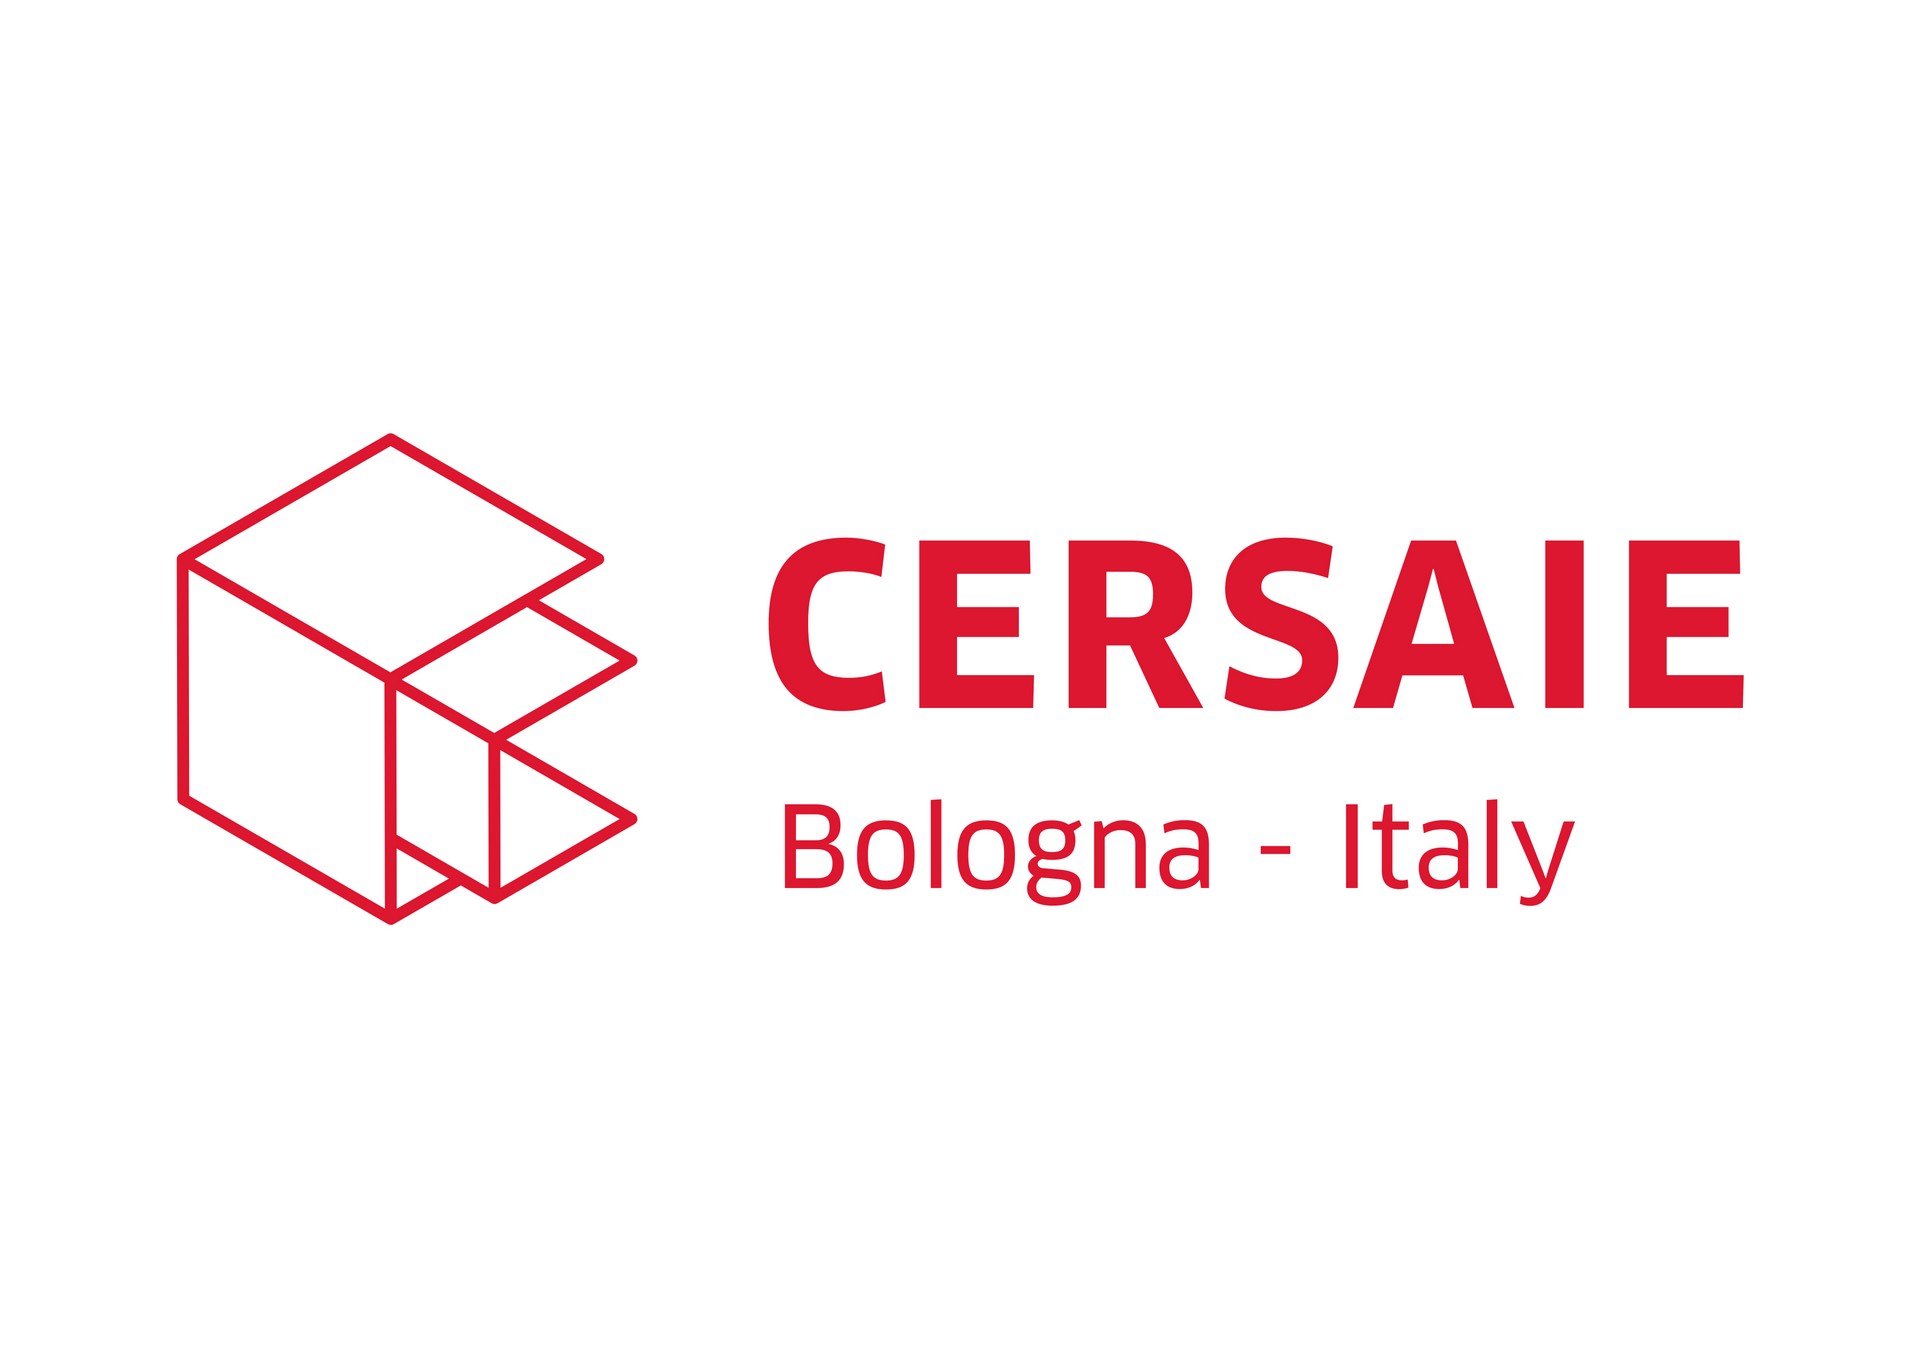 Cersaie 2022: encounters and new developments at the 39th edition
